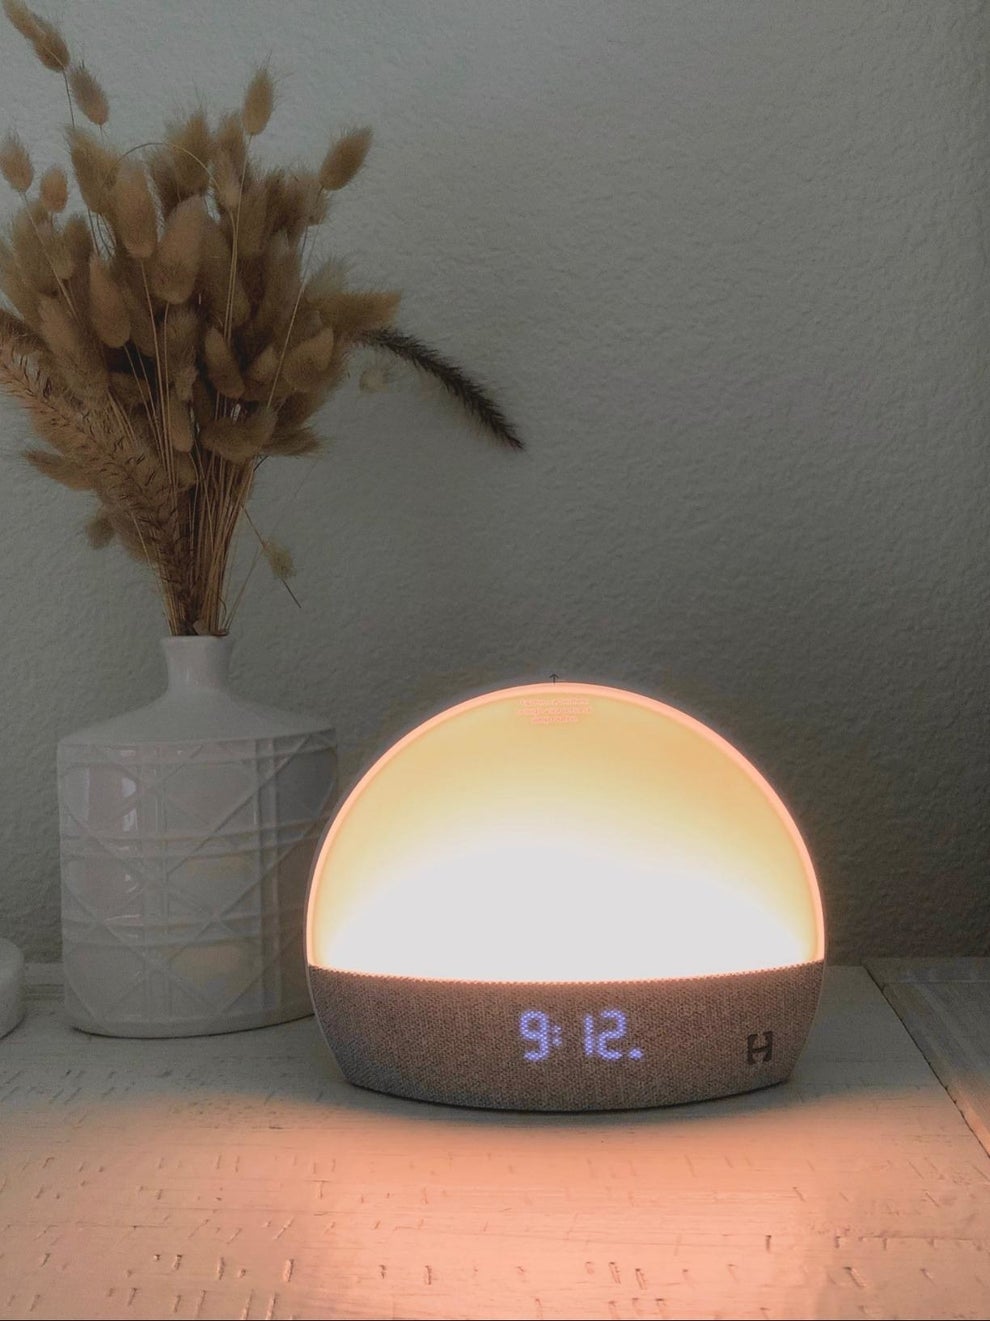 Hatch Restore Review: This Trendy Sunrise Alarm Clock Helped Me